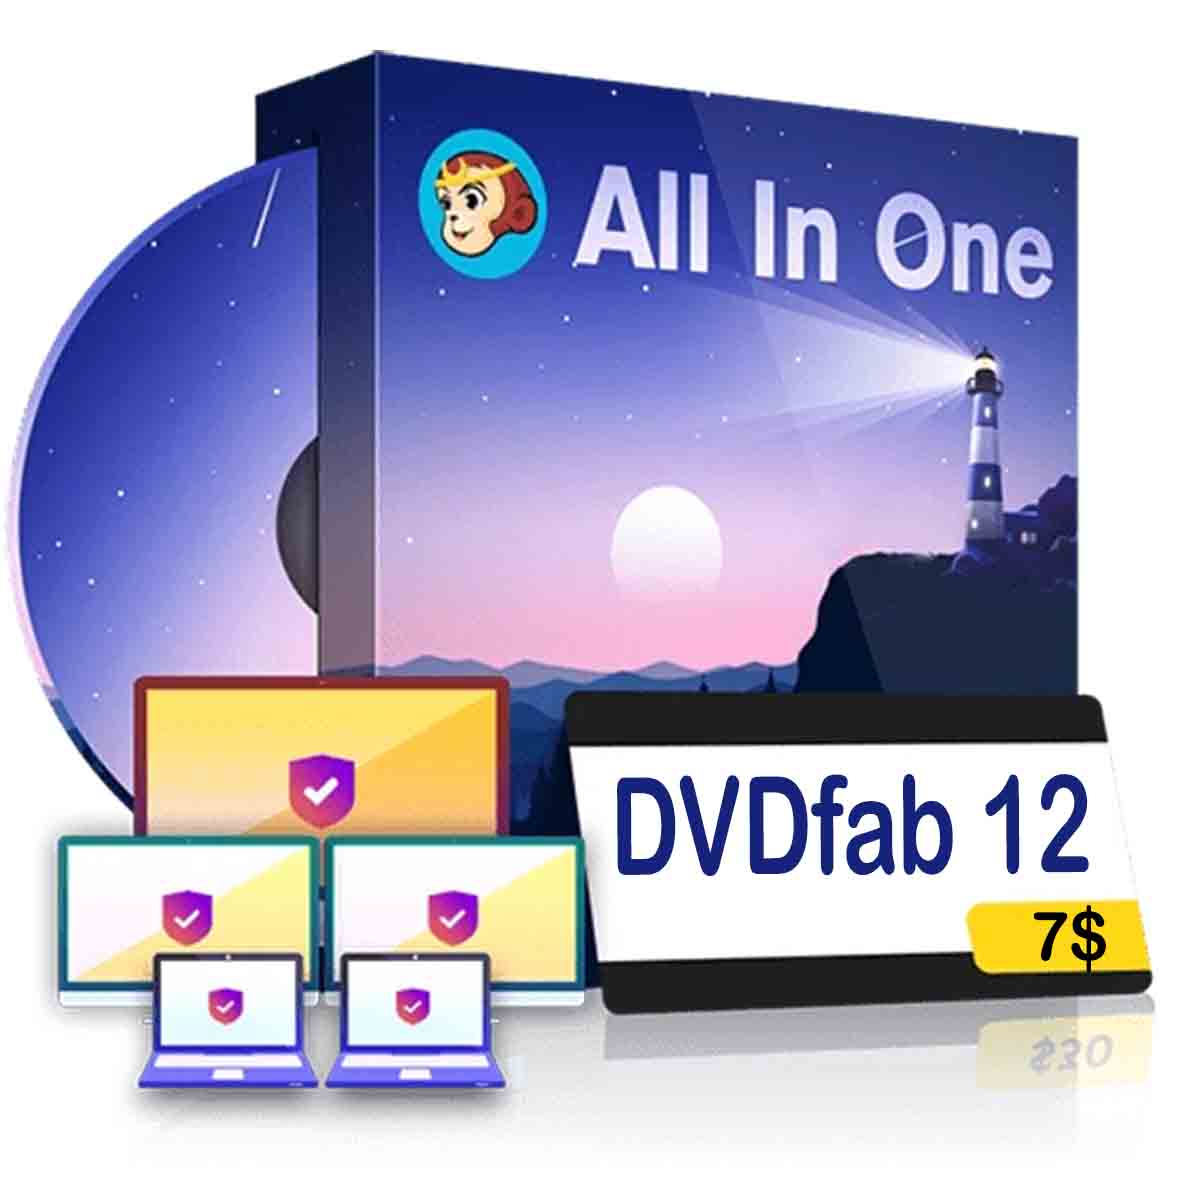 Buy DVDFab 12 software or windows software at the best and cheap price on Fastestkey.com.